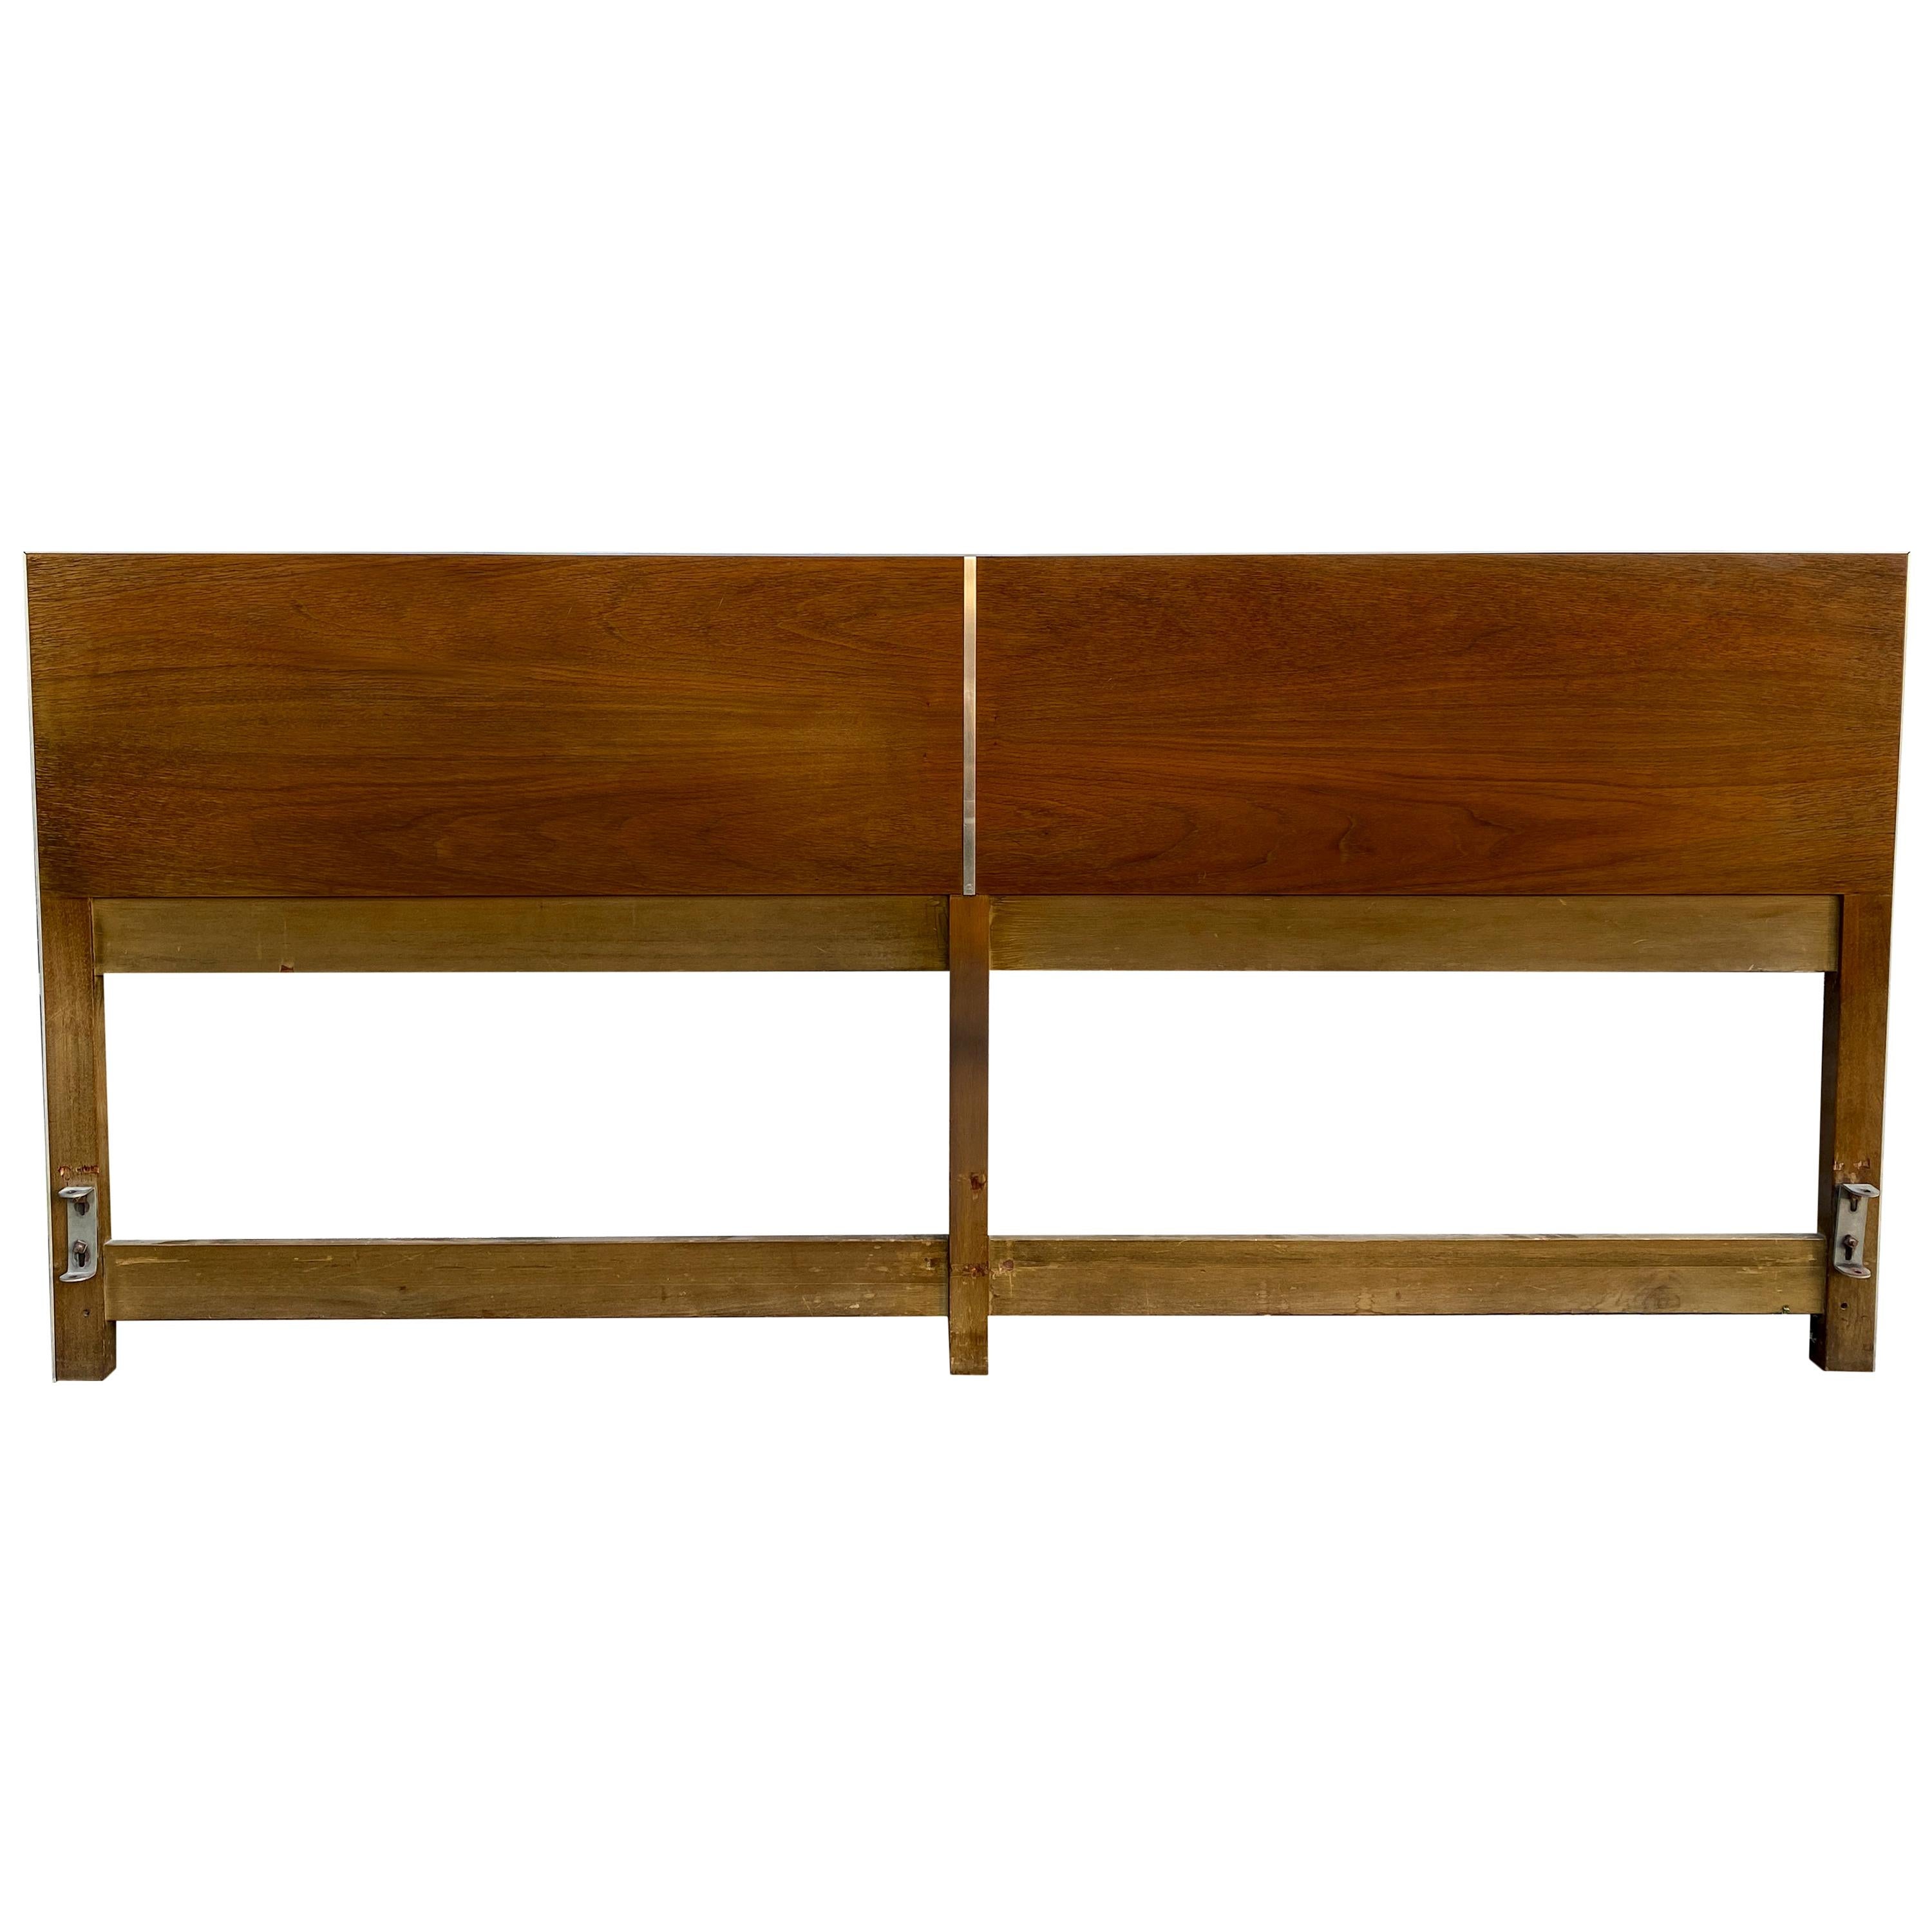 Beautiful Midcentury Headboard by Paul McCobb for Calvin King Bed